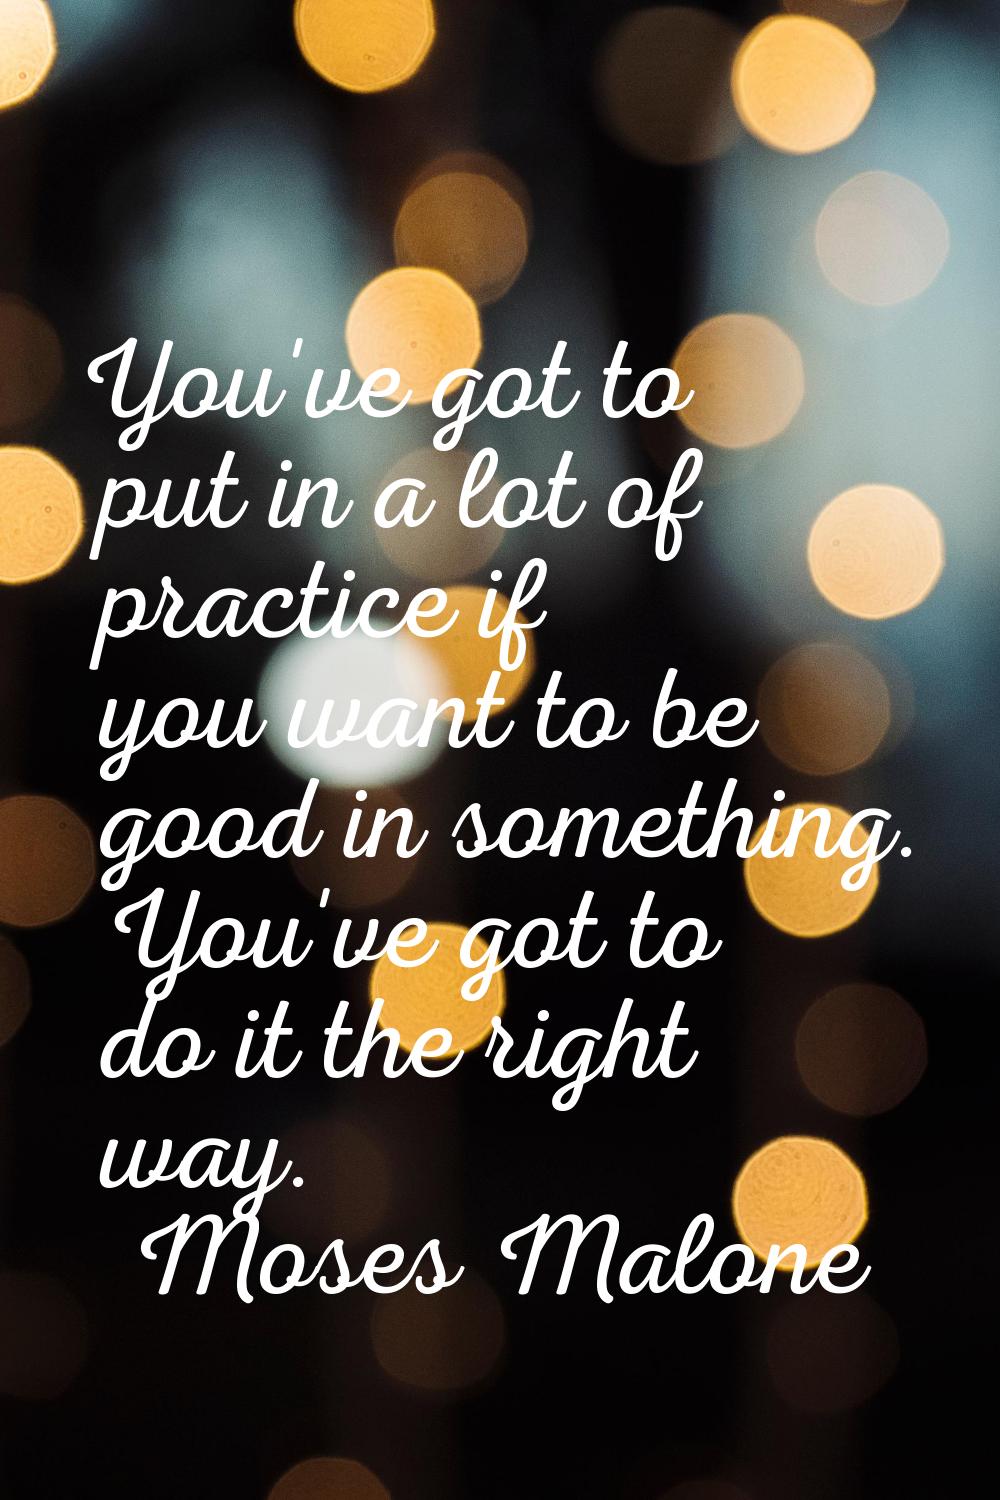 You've got to put in a lot of practice if you want to be good in something. You've got to do it the